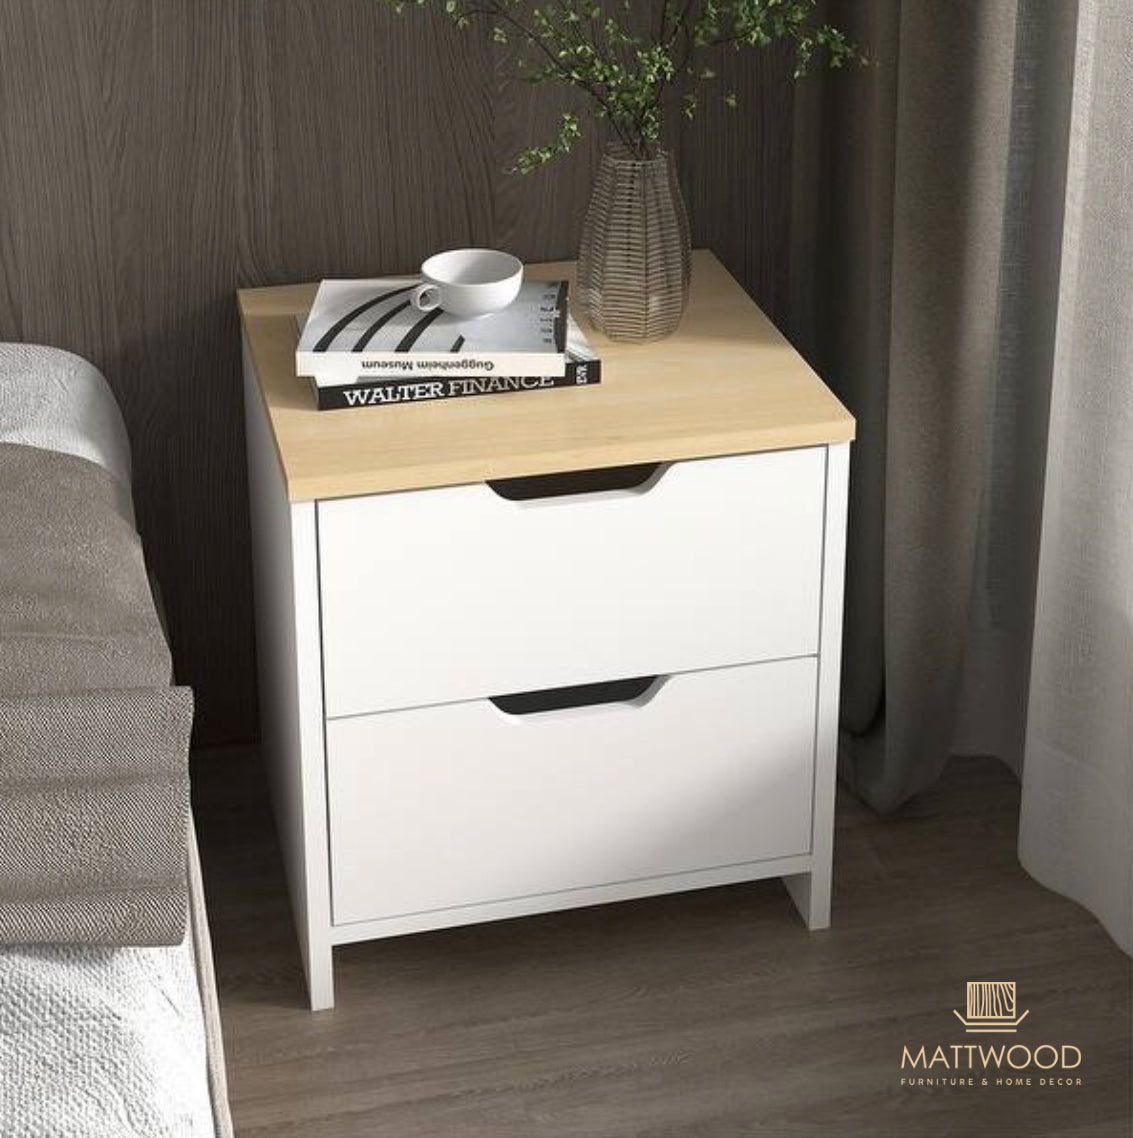 Mudo side table